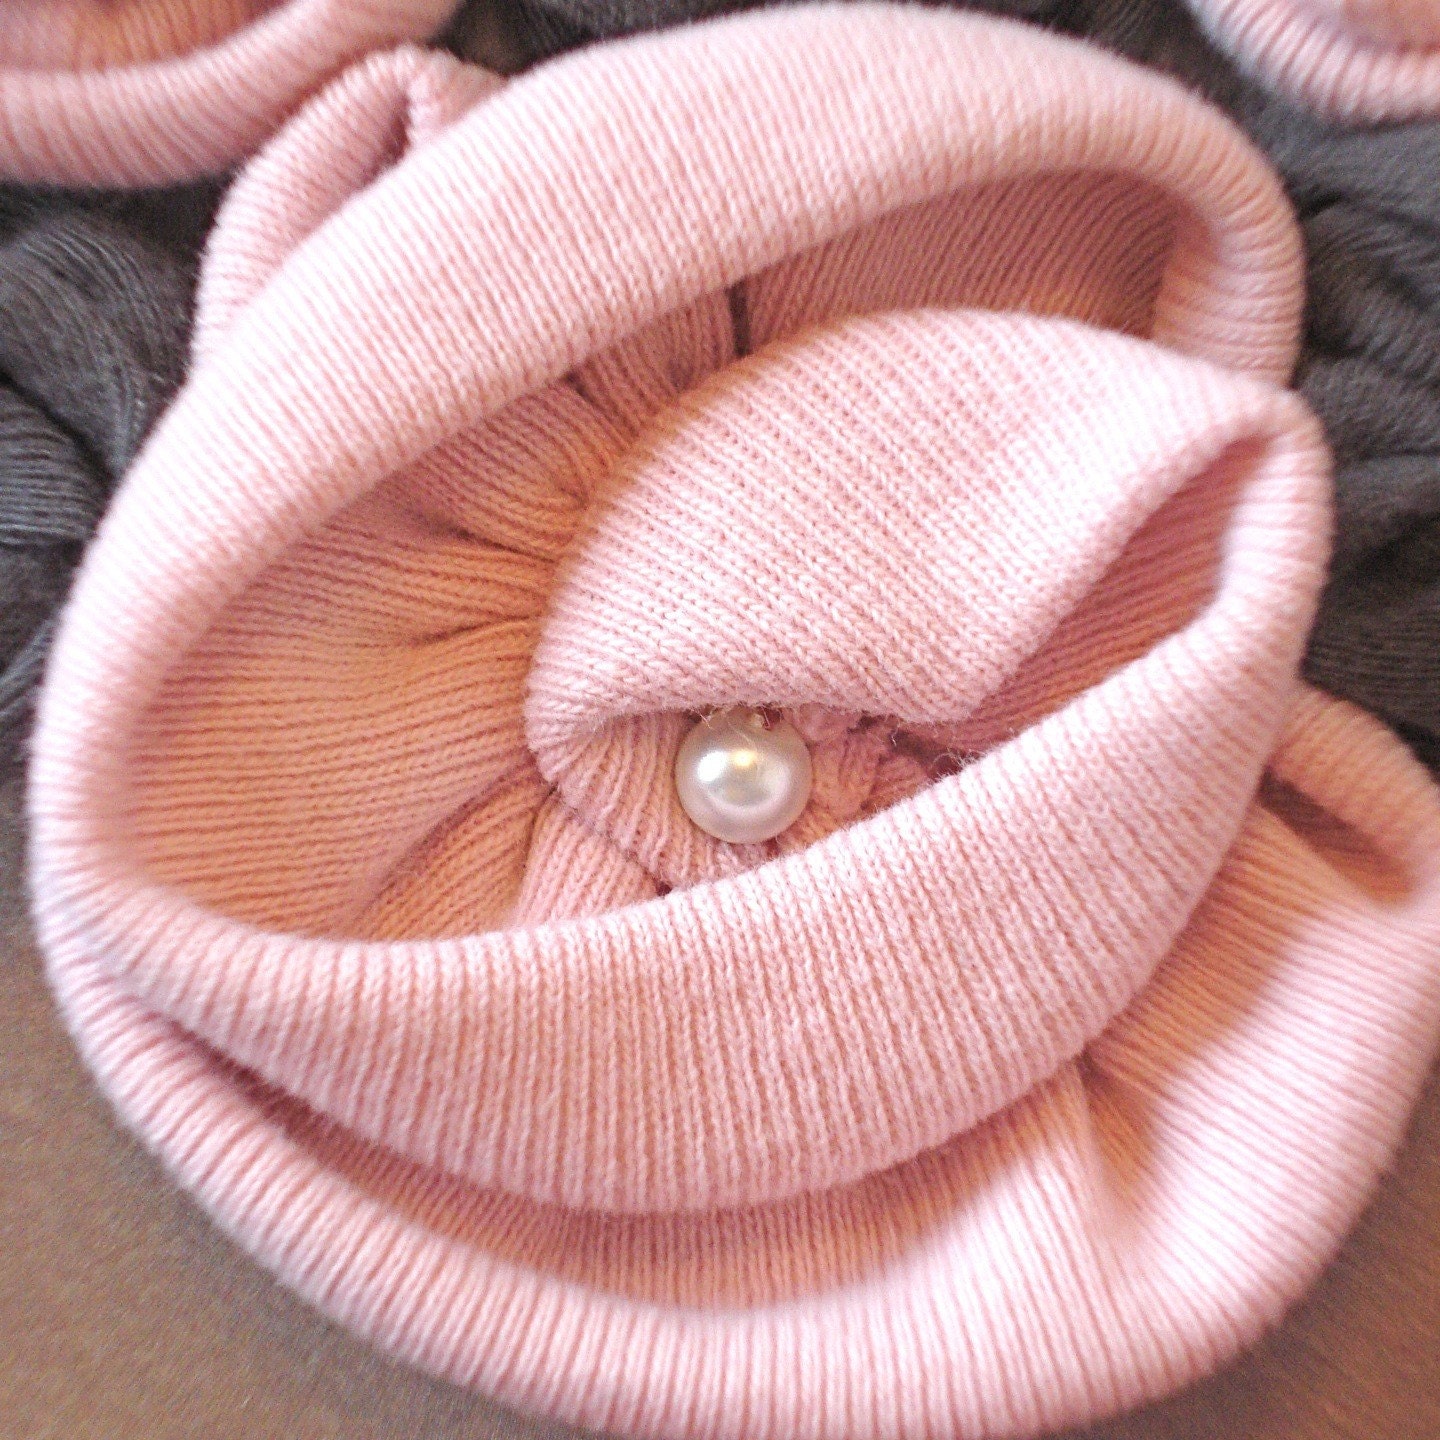 Recycled T Shirt Flower Bib Necklace - Pink and Grey